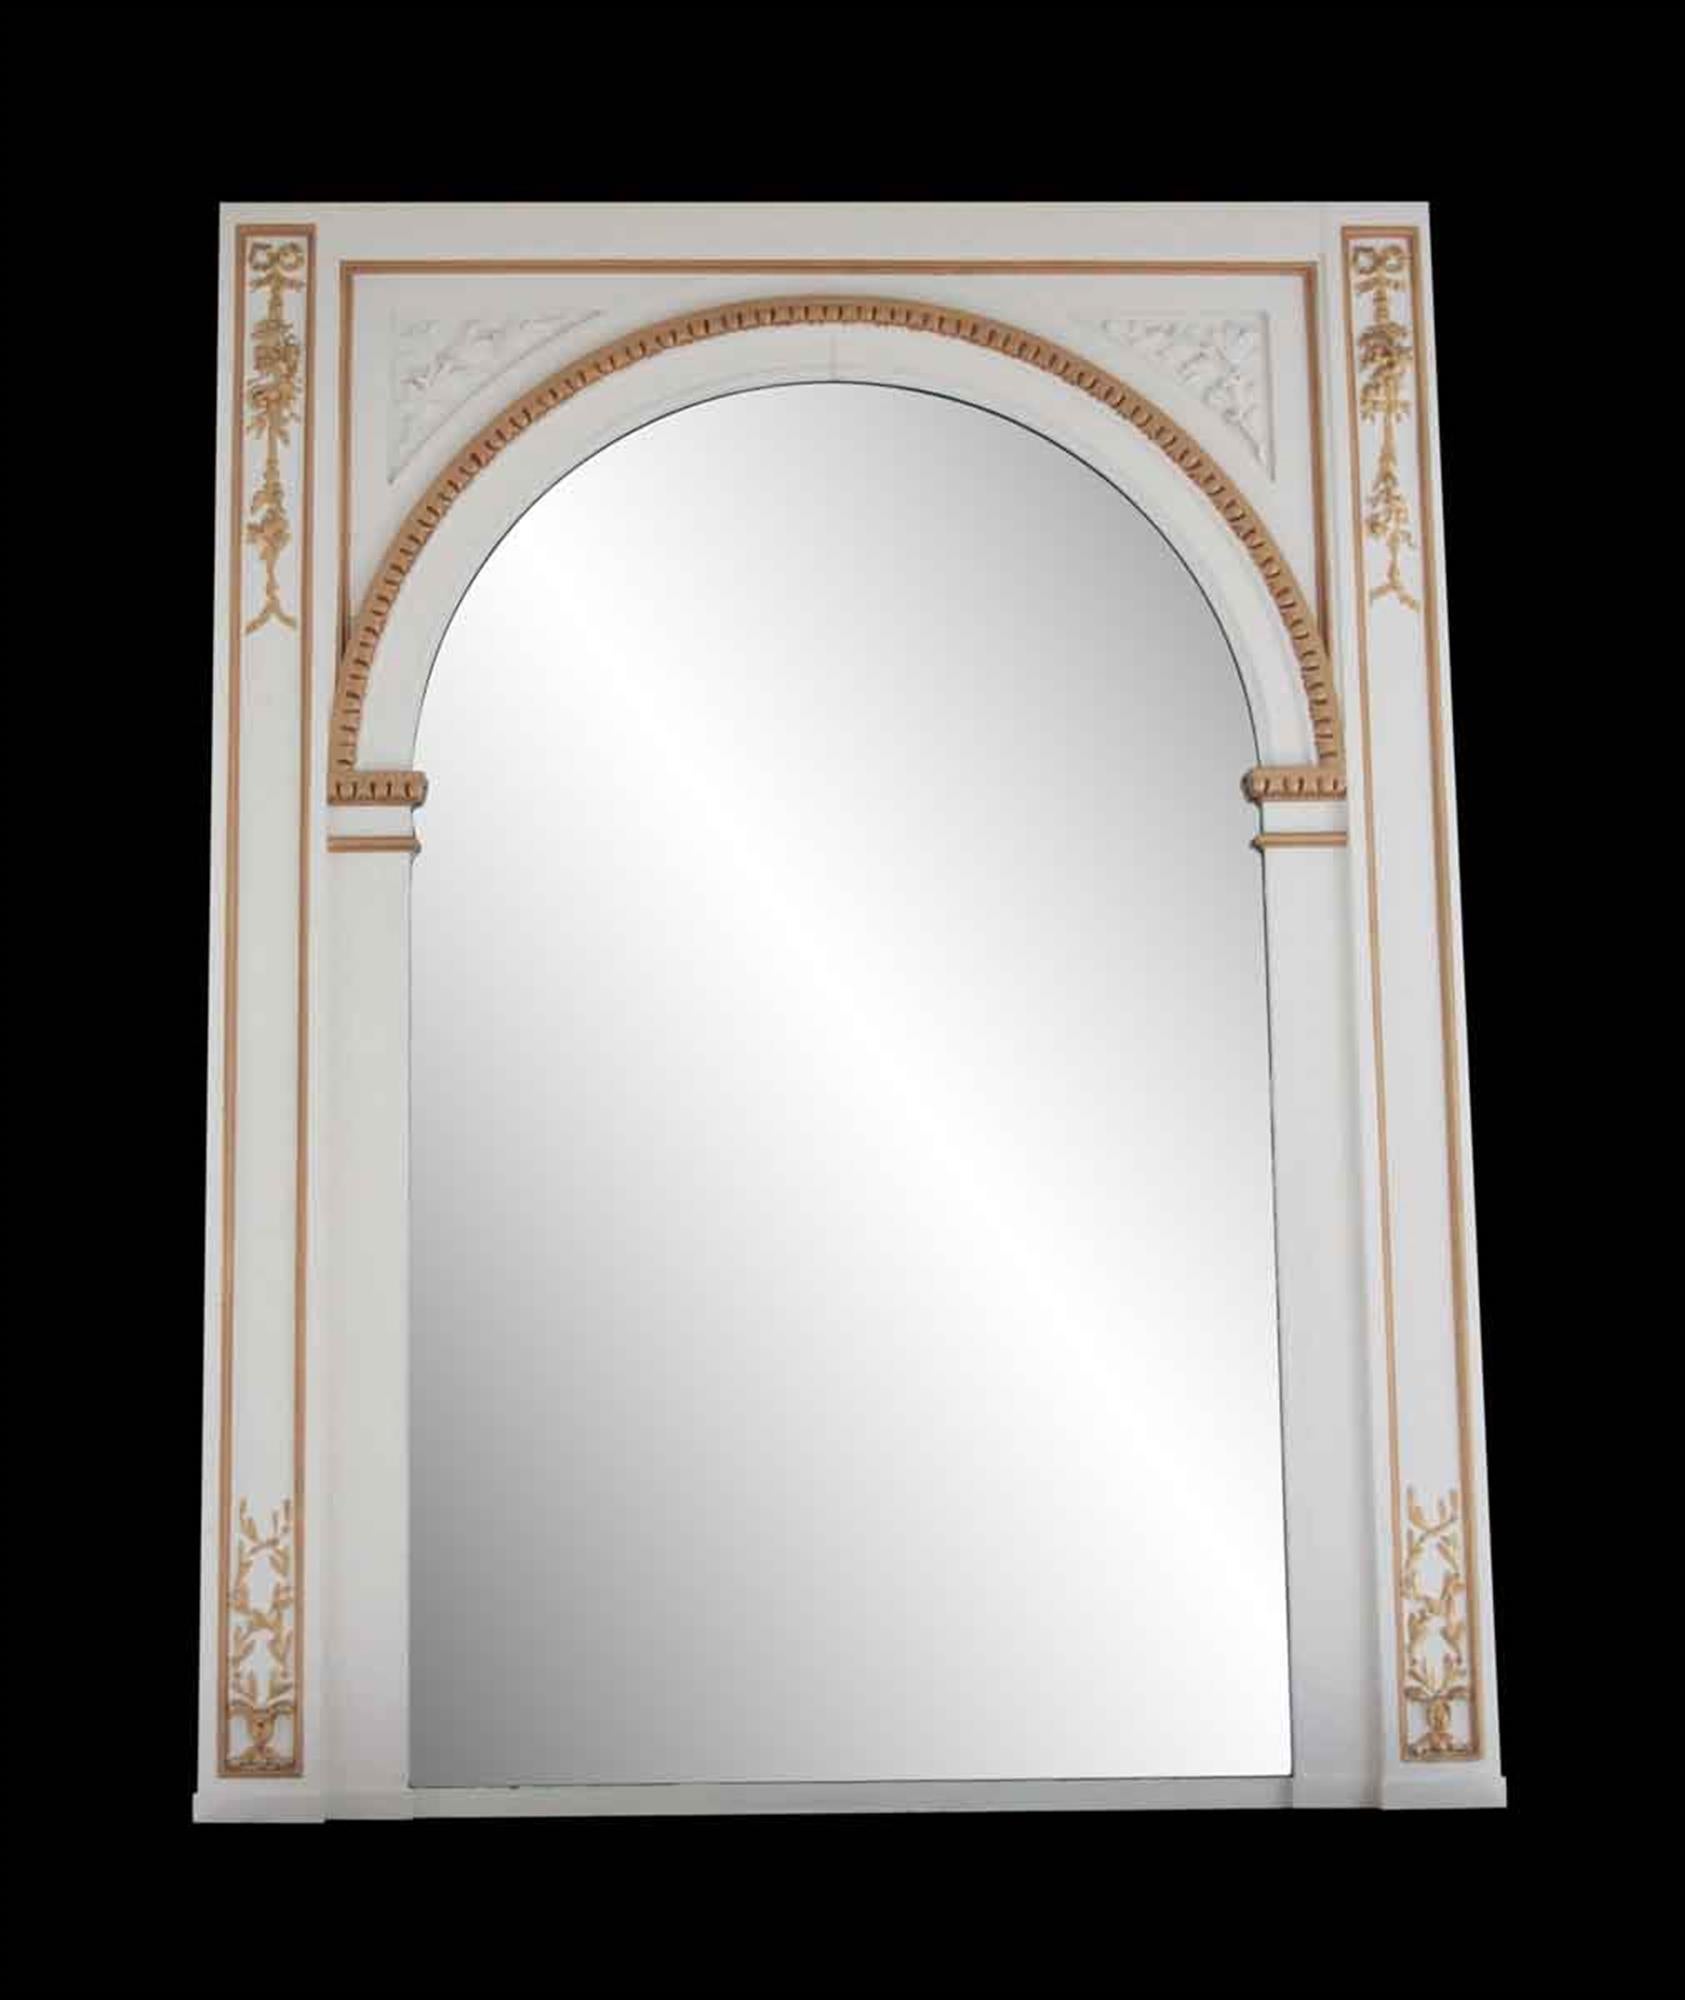 1980s painted carved white wooden over mantel mirror with white and gold details from the NYC Waldorf Astoria Hotel. Original to Room 30 H4. Waldorf Astoria authenticity card included with your purchase. This can be viewed at our Scranton,